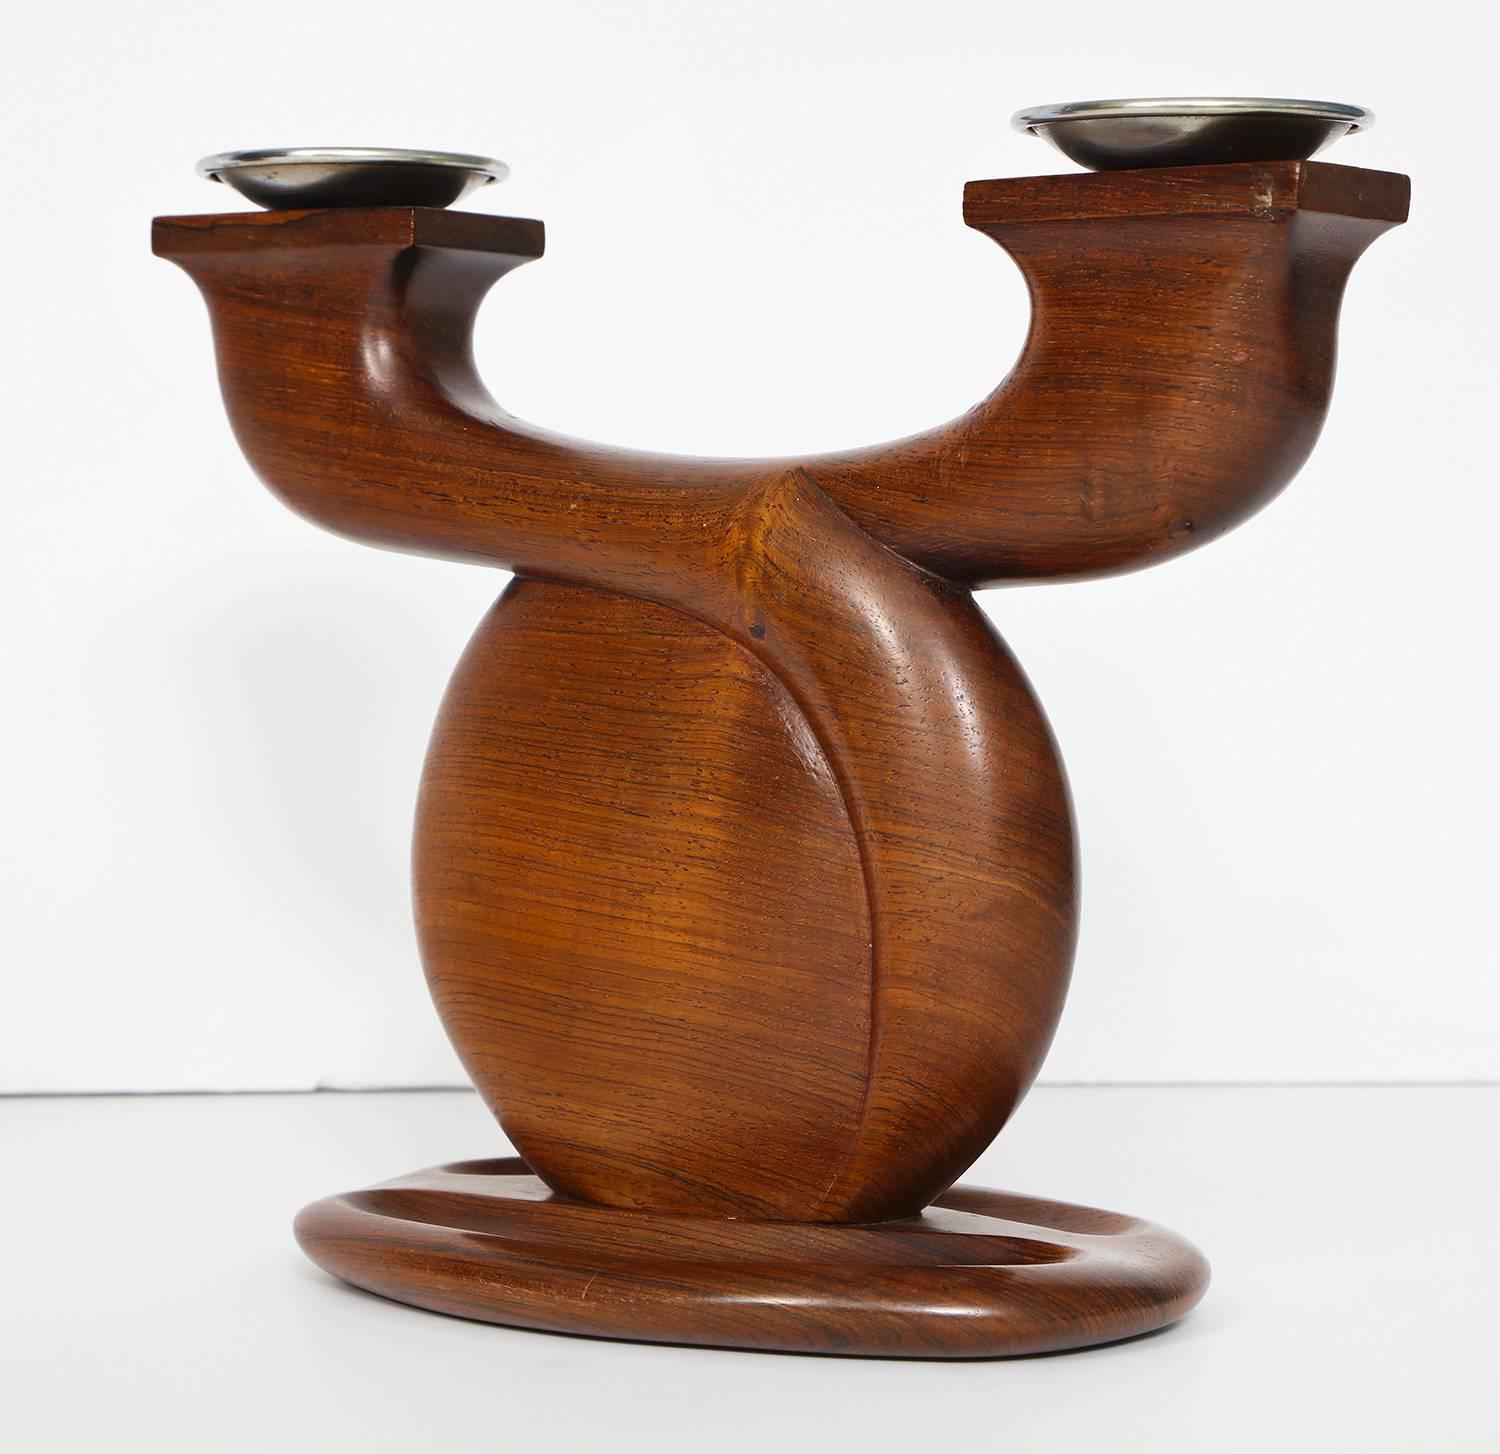 Solid ebony candlesticks. Hand-sculpted with metal bobeche inserts. Each piece is signed on underside.